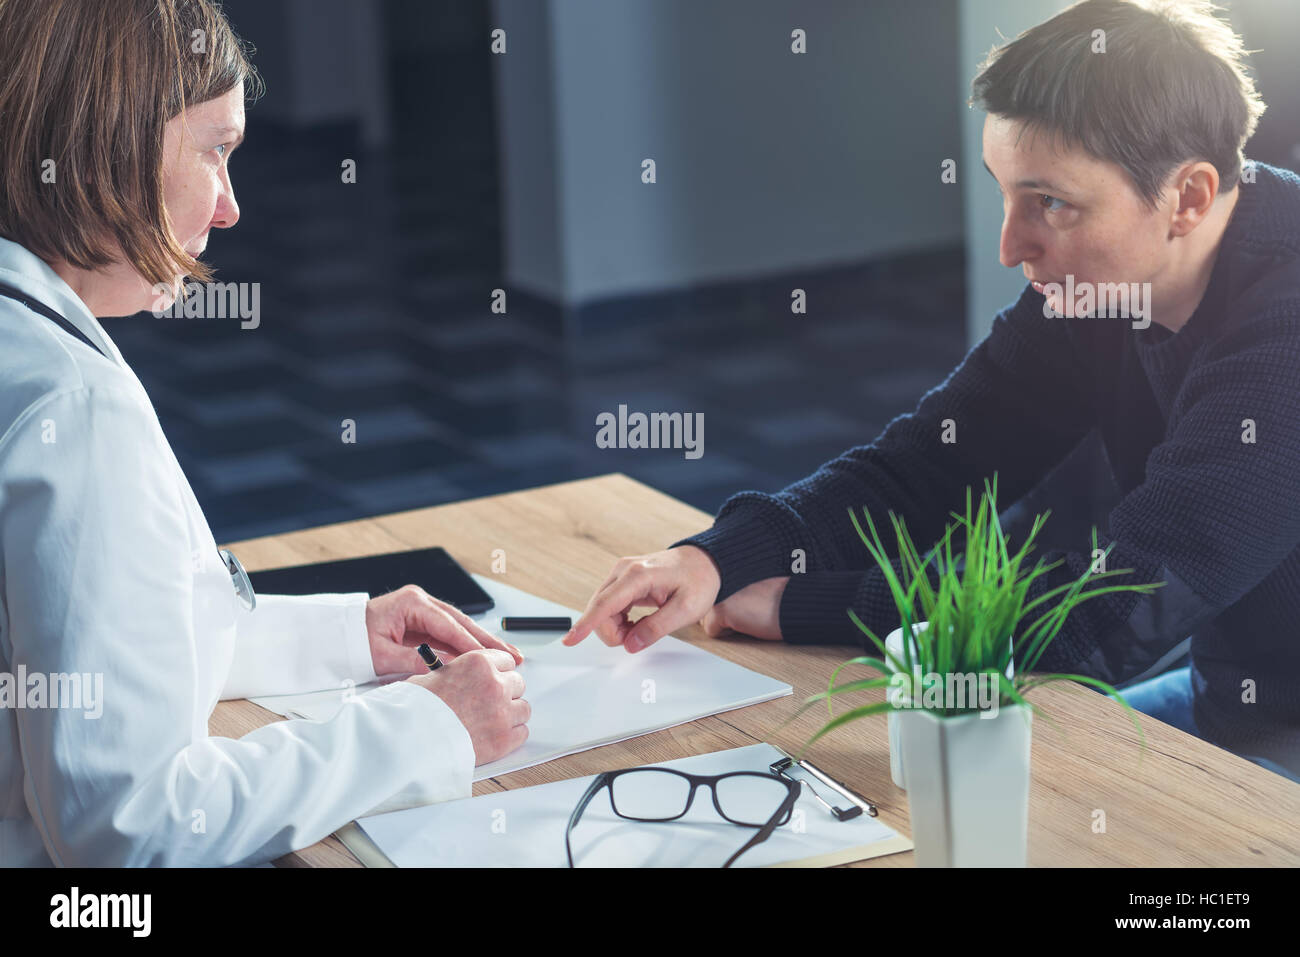 Female doctor and patient consultation during medical exam in hospital examination room Stock Photo